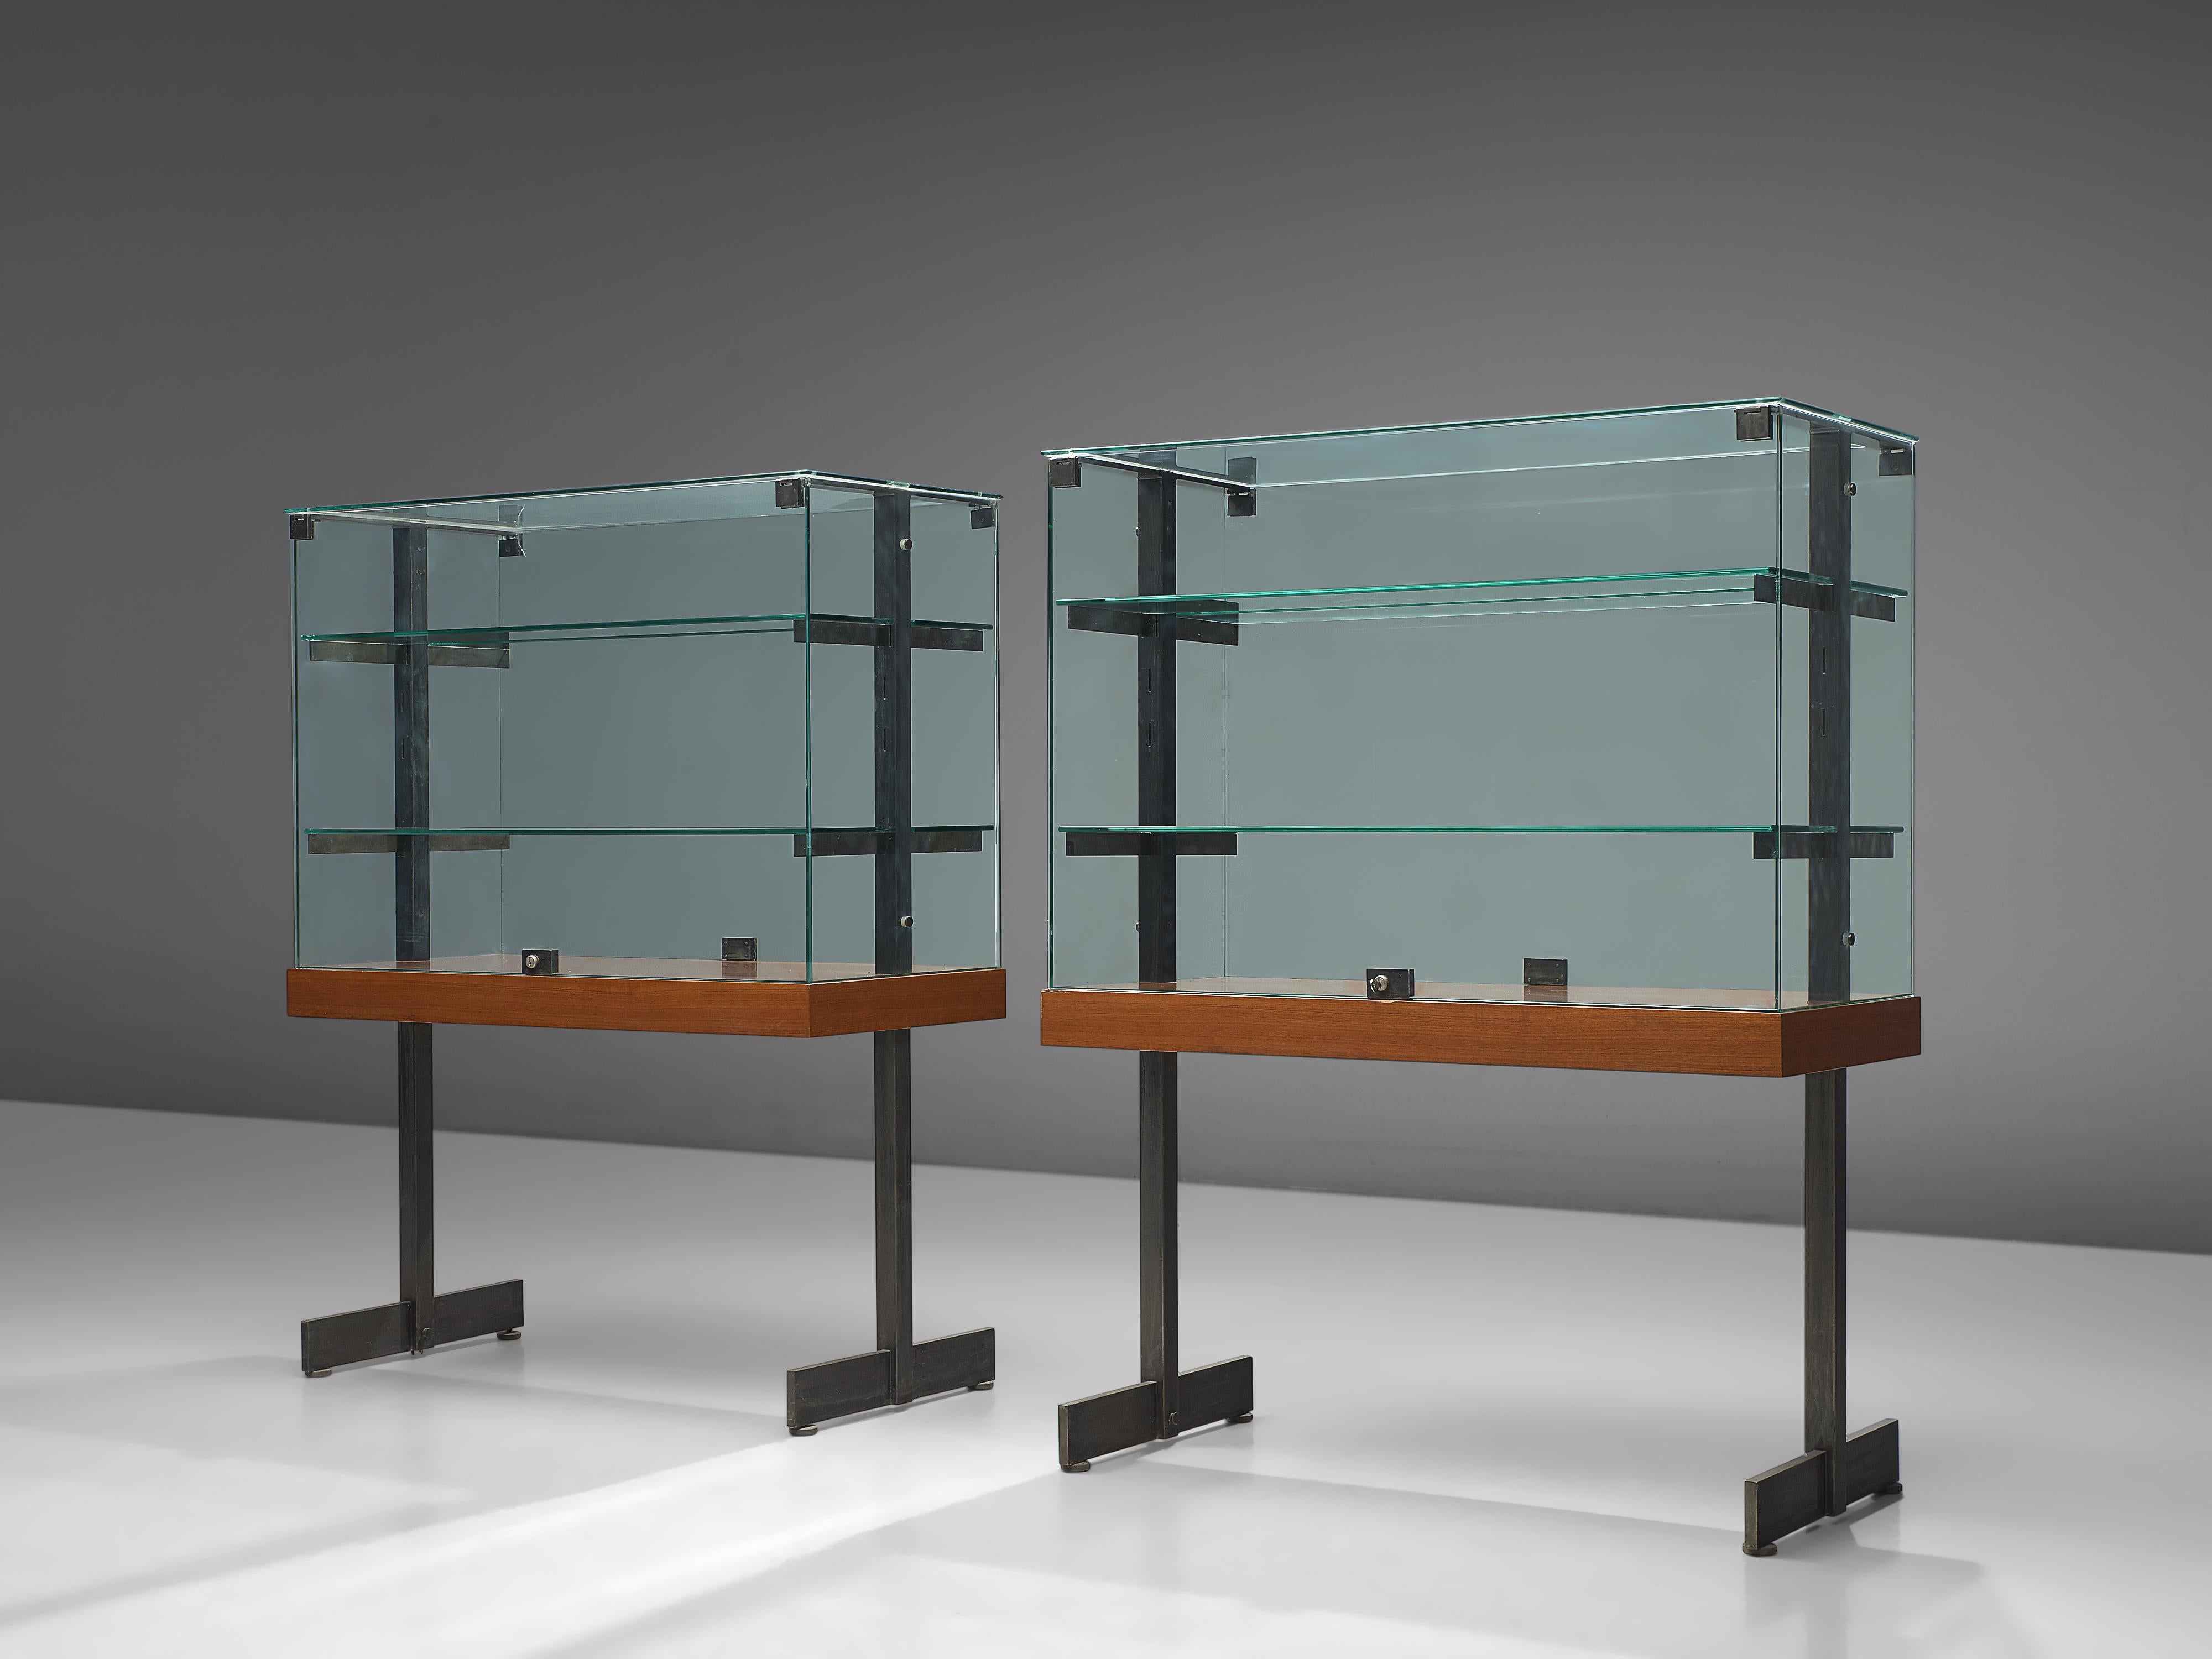 De Coene, showcase, teak, steel, glass, Belgium, 1960s

Modernist showcase with lockable doors accompanied with a steel frame and wood shelf. The vitrine features the Brutalist characteristics of De Coene. The showcase was originally designed for